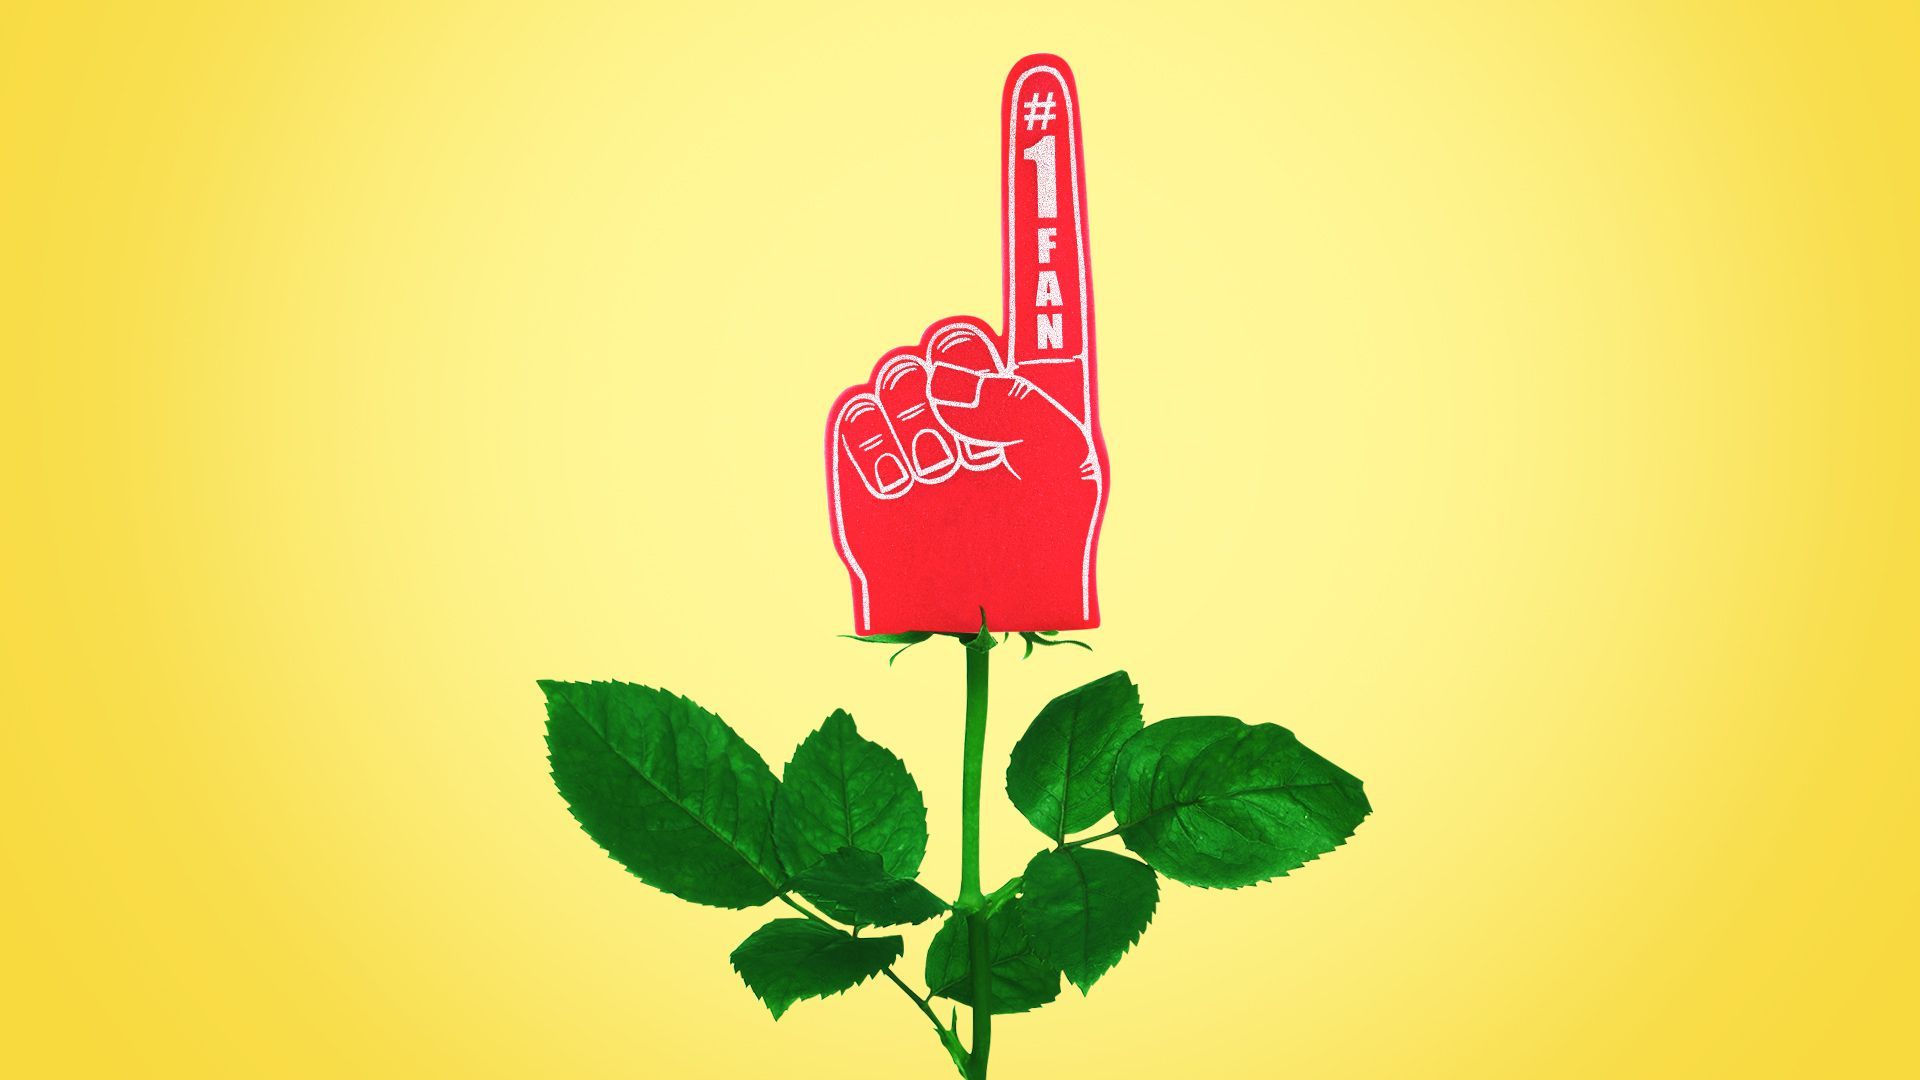 Illustration of a number one sports hand on a flower stem as if its a may flower